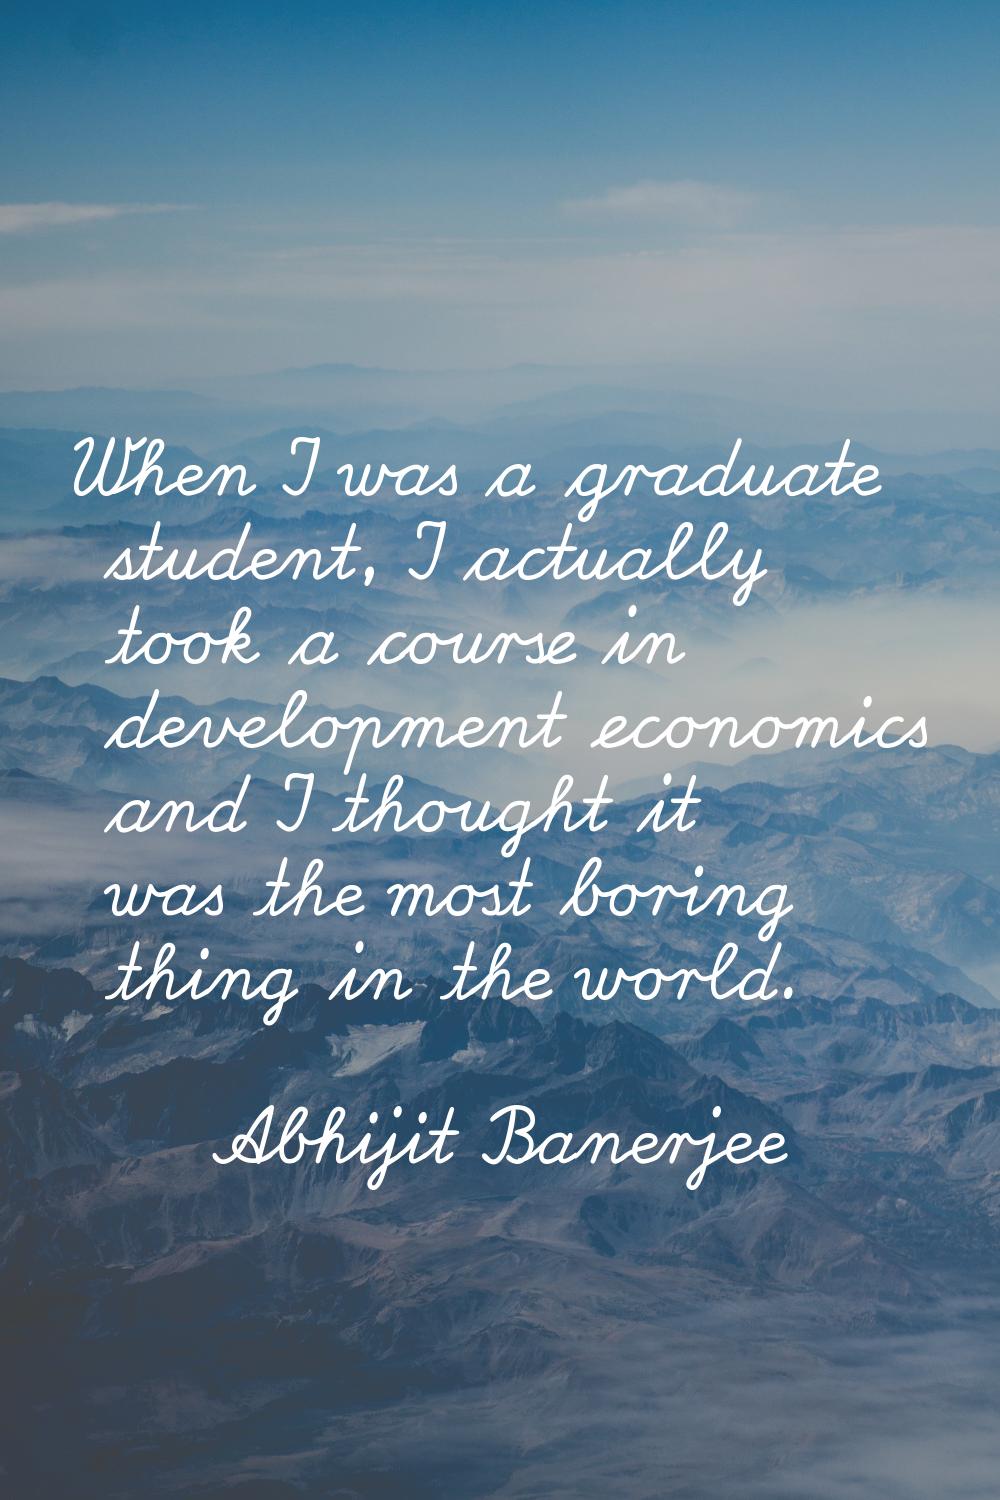 When I was a graduate student, I actually took a course in development economics and I thought it w